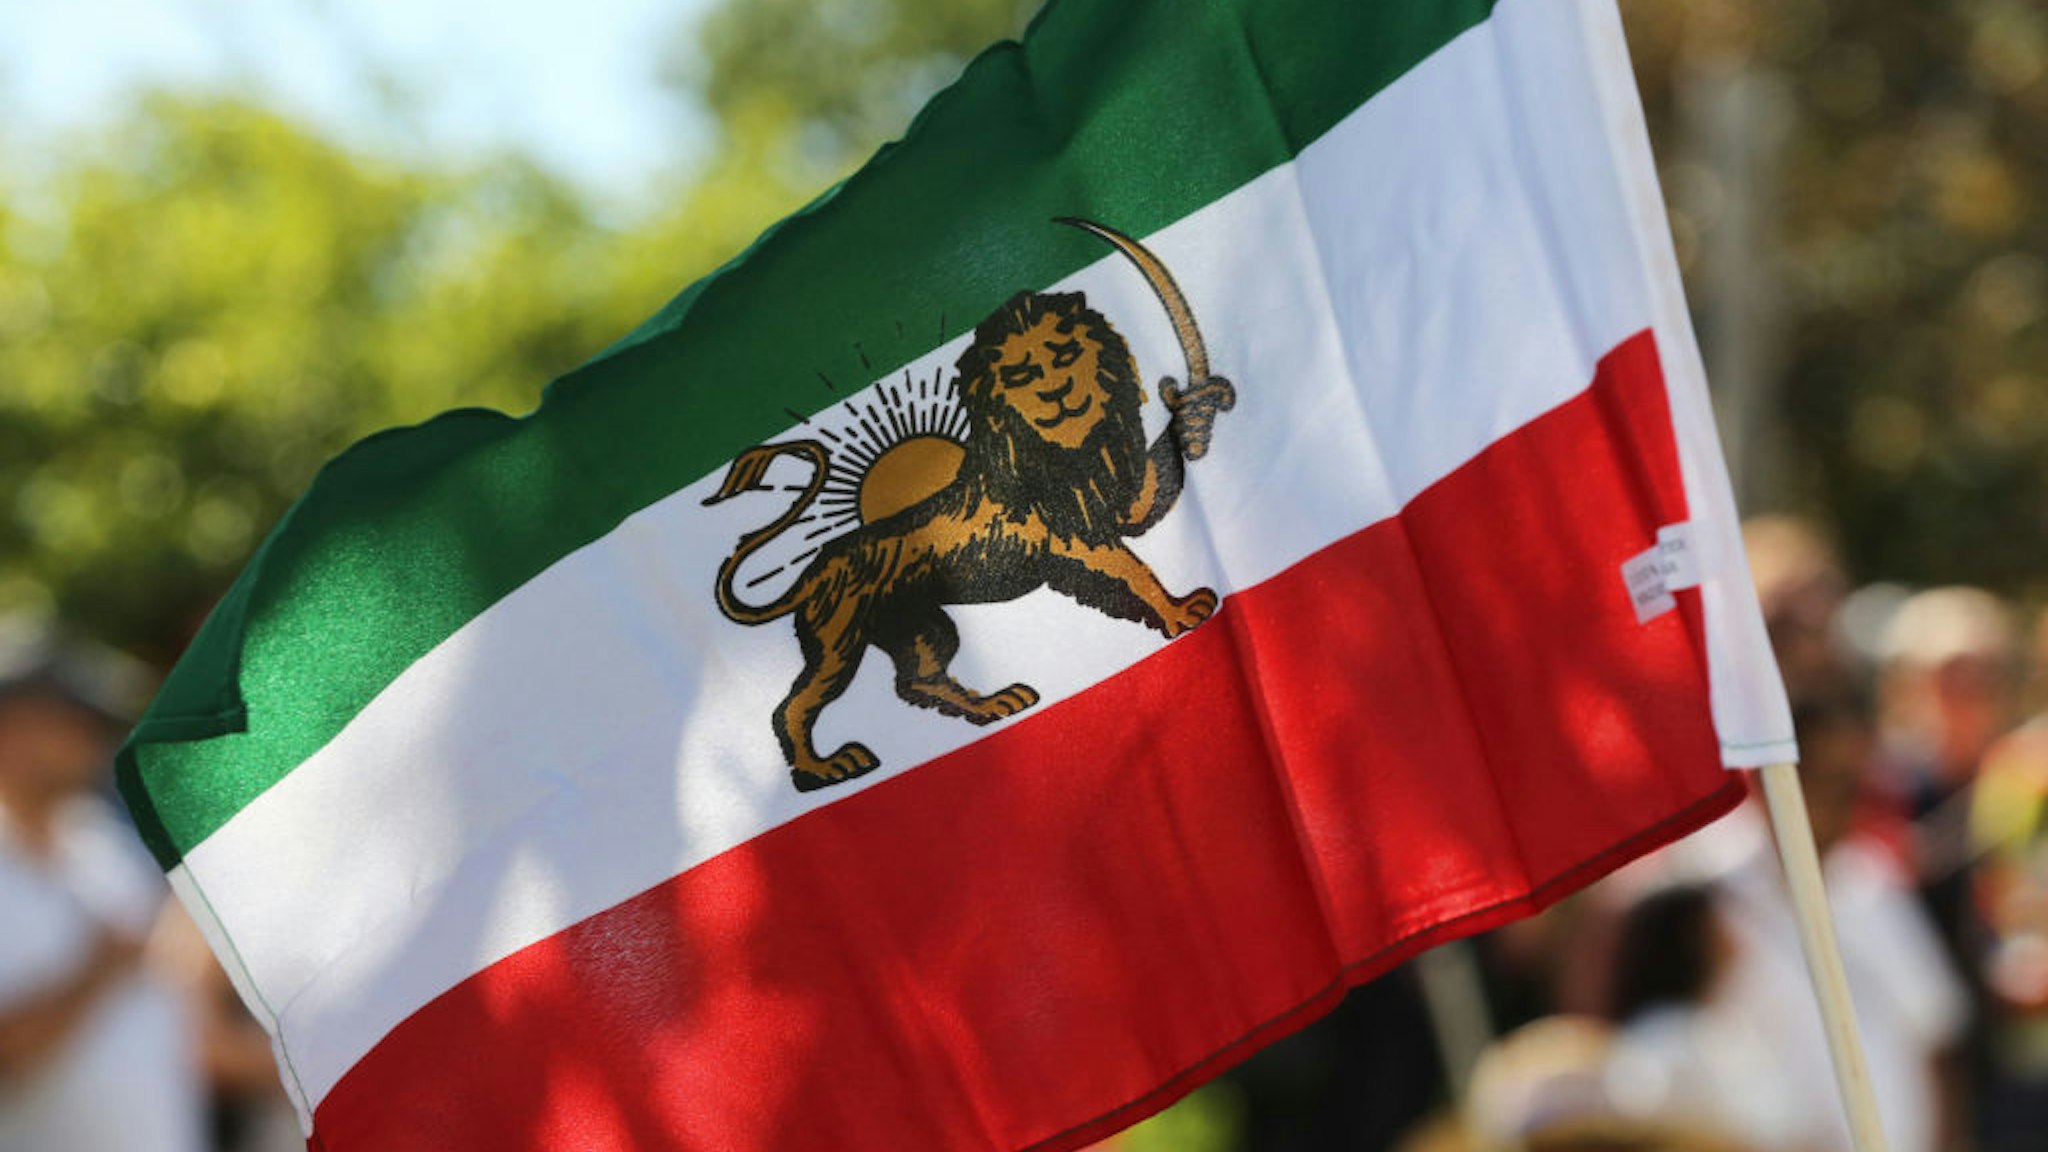 Iranian flag seen during the first ever Persian parade in Toronto, Ontario, Canada, on August 31, 2019.